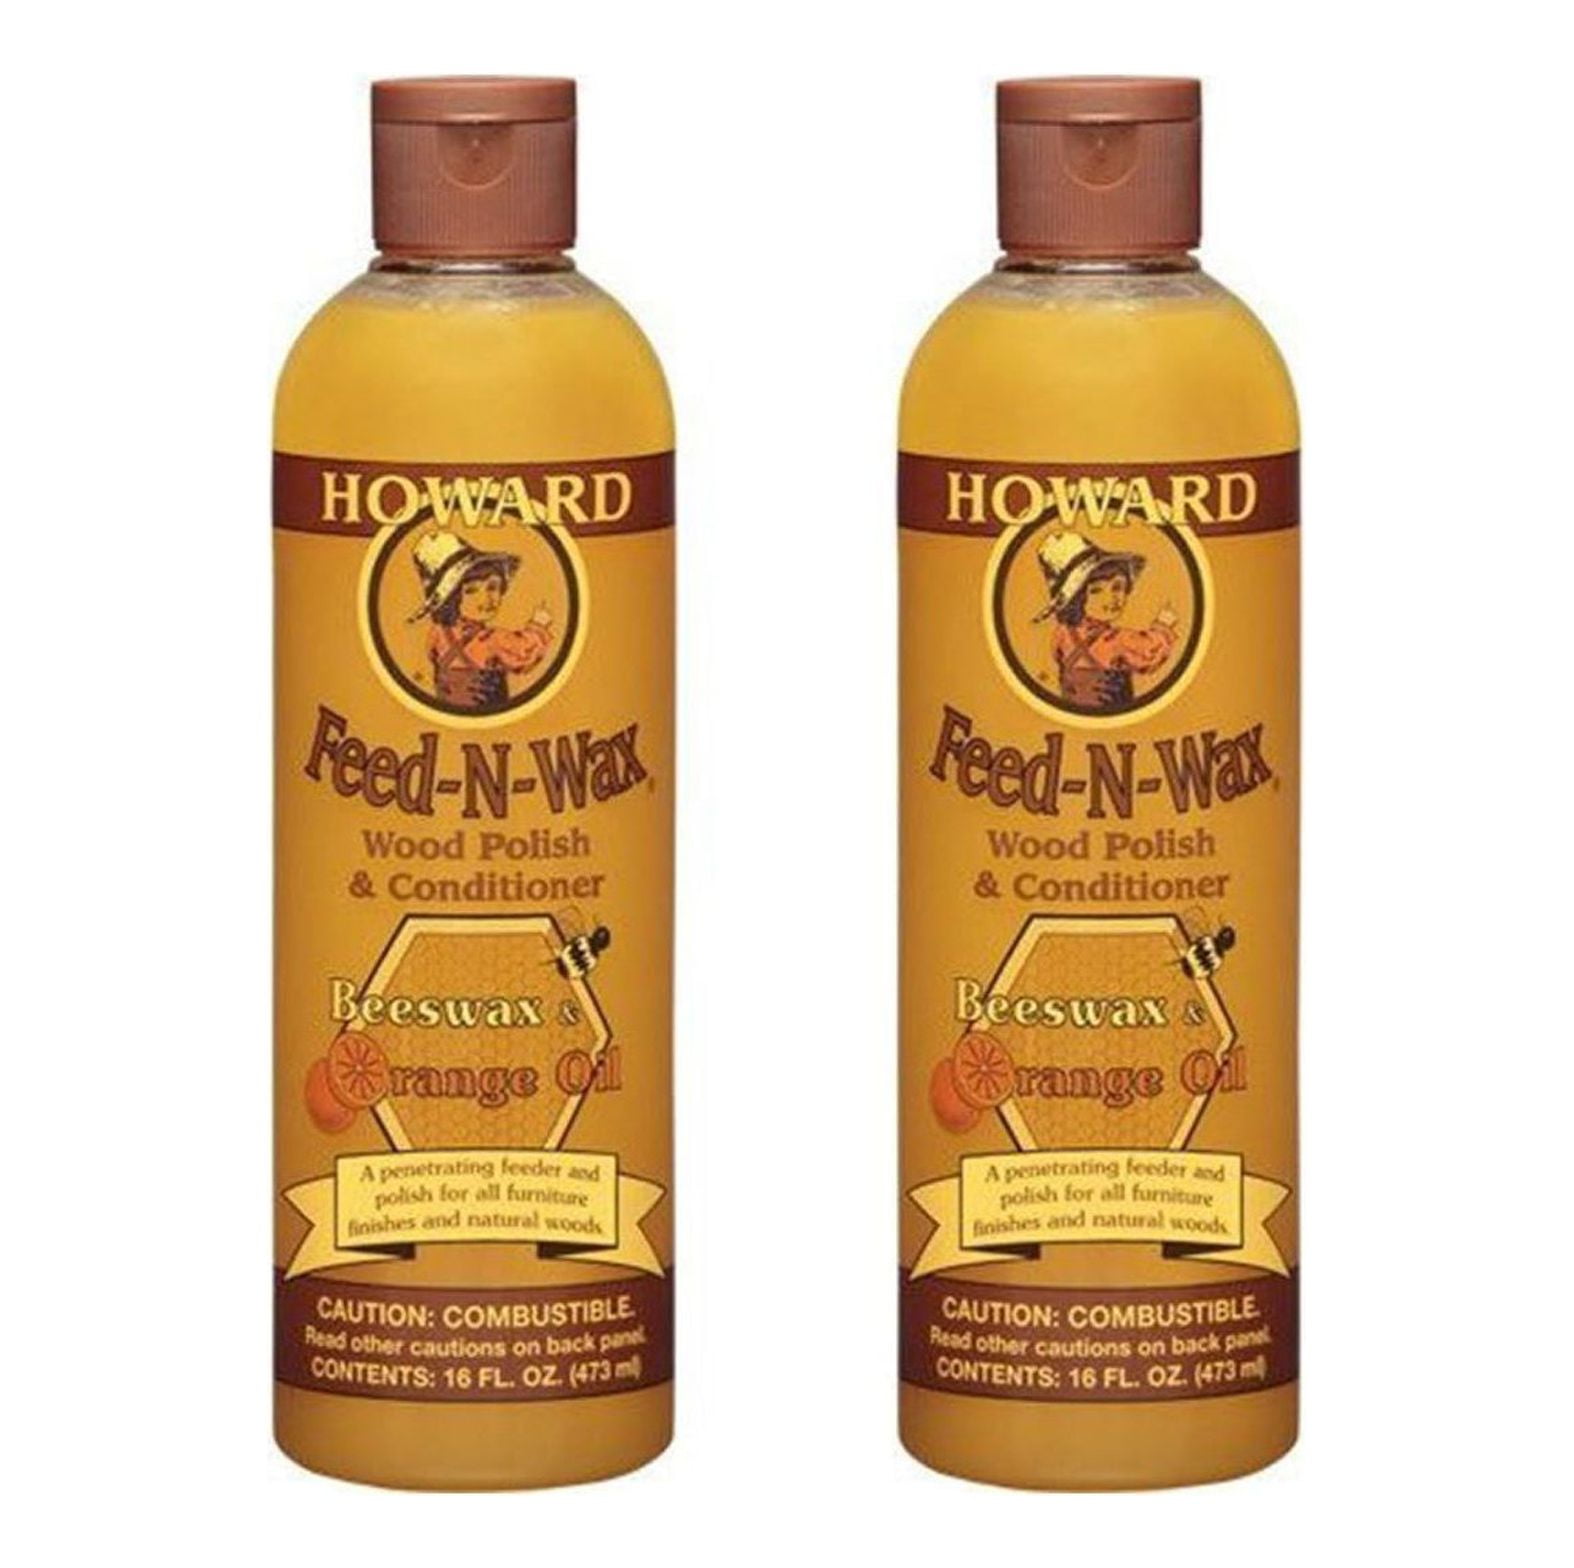 Howard Feed-N-Wax Wood Polish & Conditioner Furniture Feed, Wax and Oil In  One